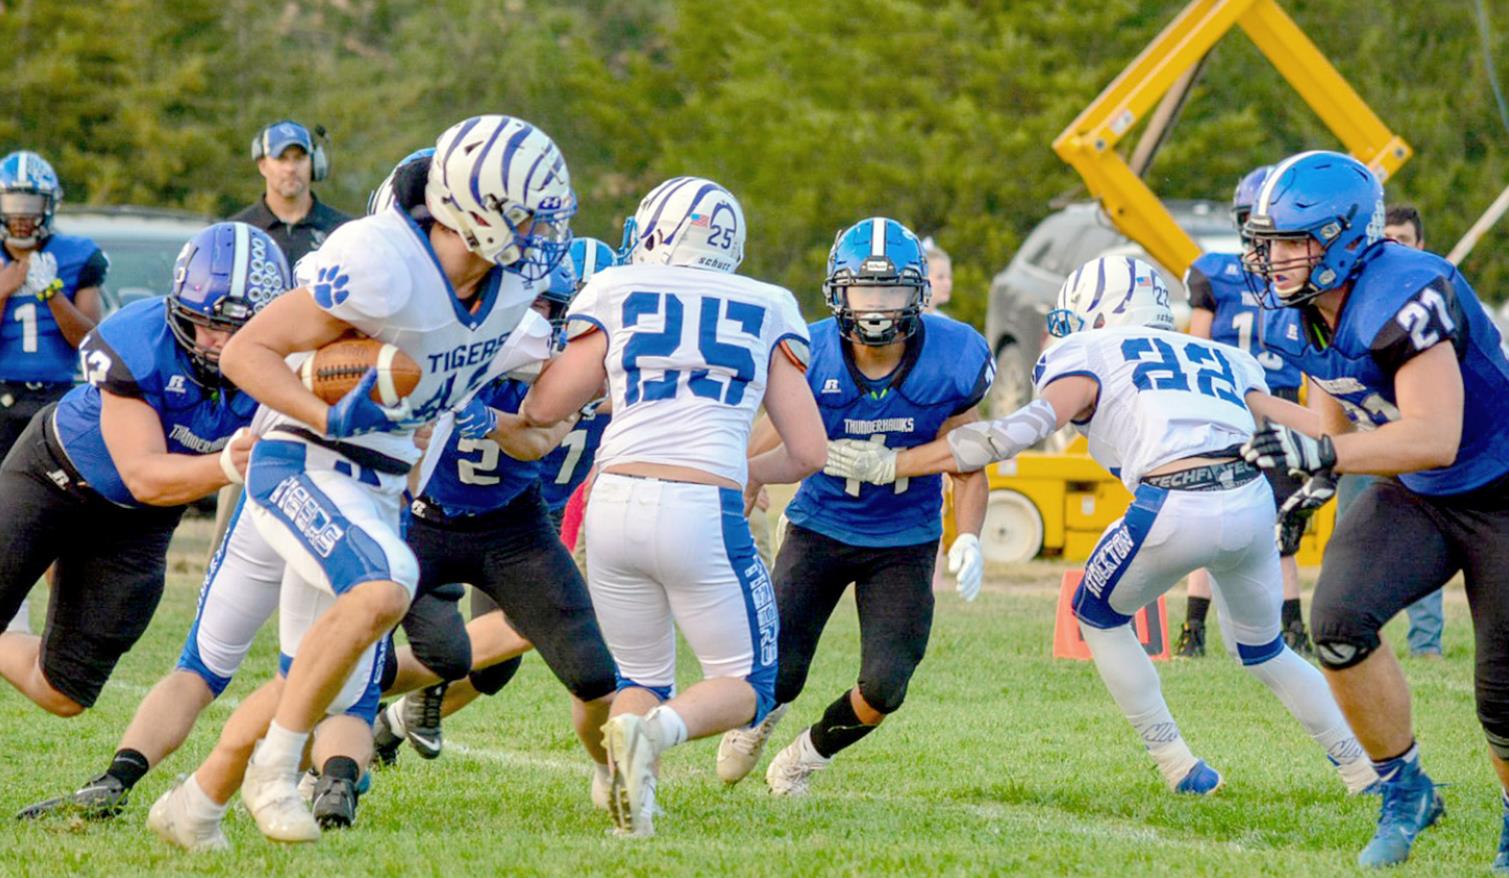 RYLAN BASART, with blockers Justus Hulse (#25) and Deyton Bedore (#22) leading the way, looks for a hole to run through Stockton’s game against Wheatland-Grinnell last Friday in Grinnell. The Tigers were defeated 54-22. (Photo courtesy of Brittany Lewis)